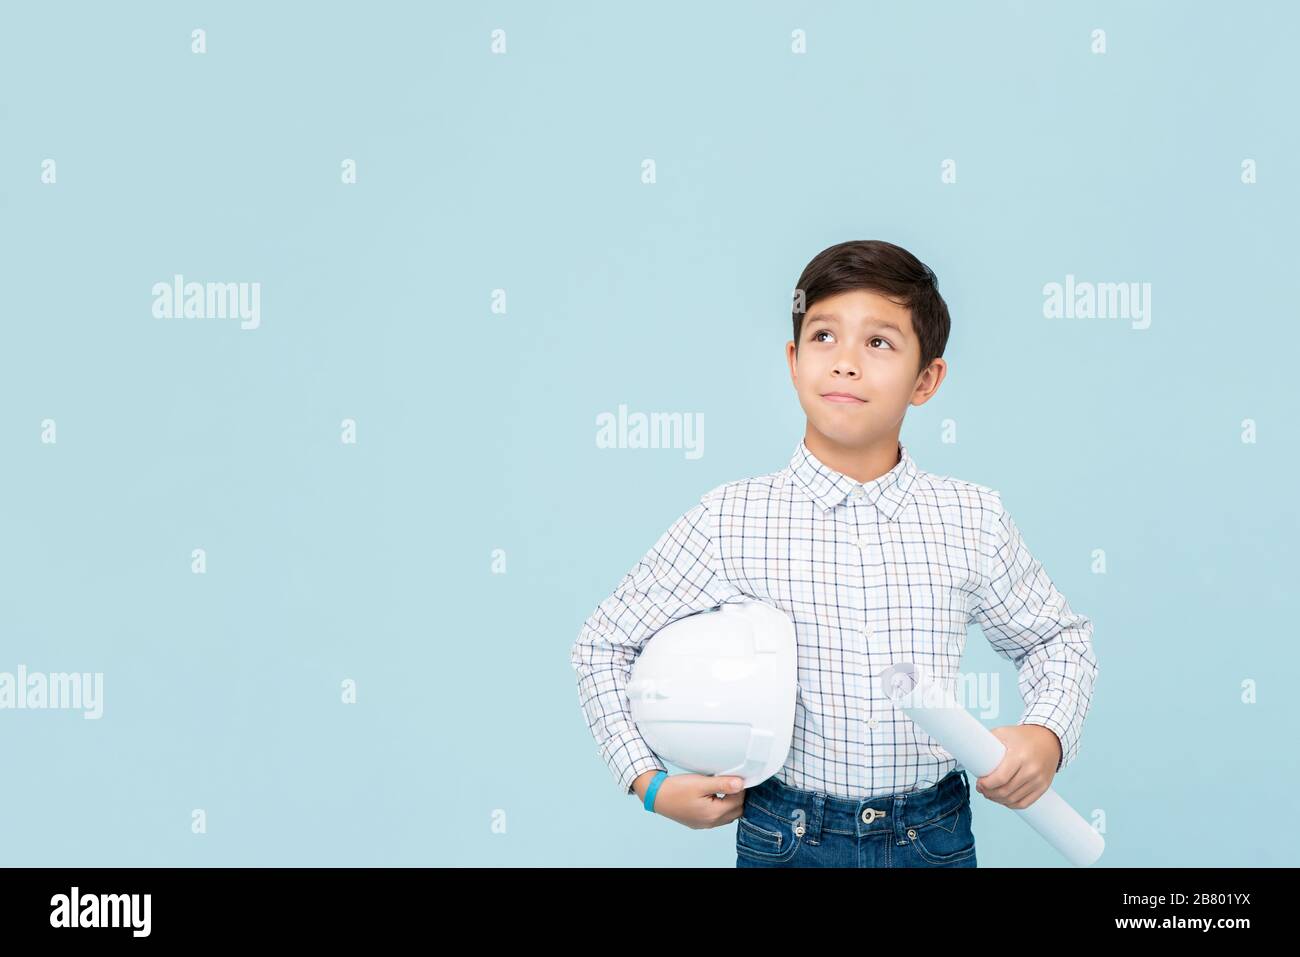 Smiling young asian boy aspiring to be future engineer holding white hardhat and blueprint looking upward in light blue isolated studio backgorund Stock Photo